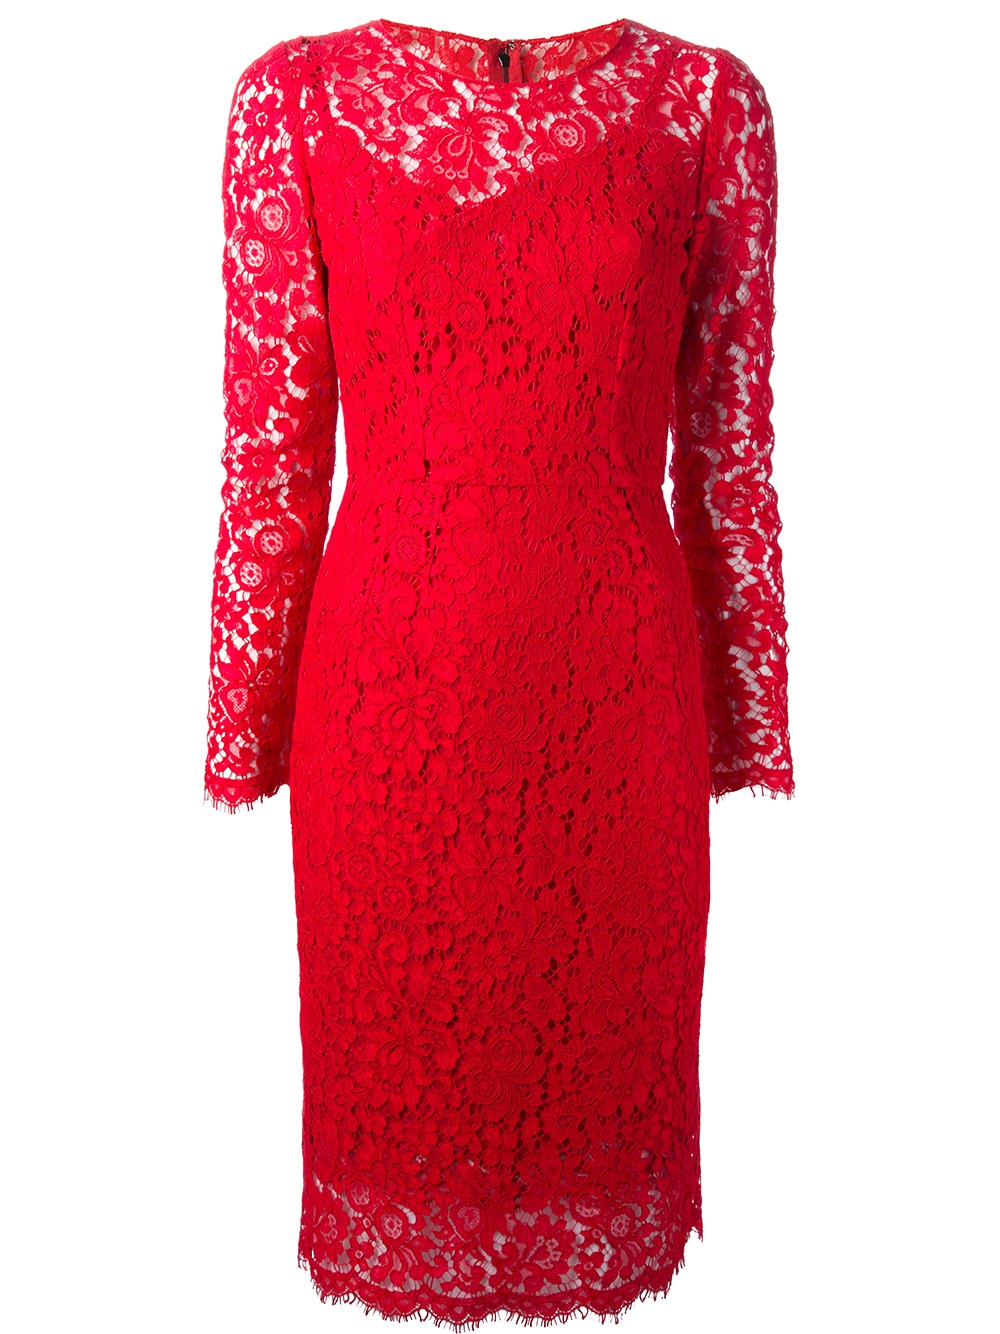 Dolce & gabbana Lace Dress in Red | Lyst